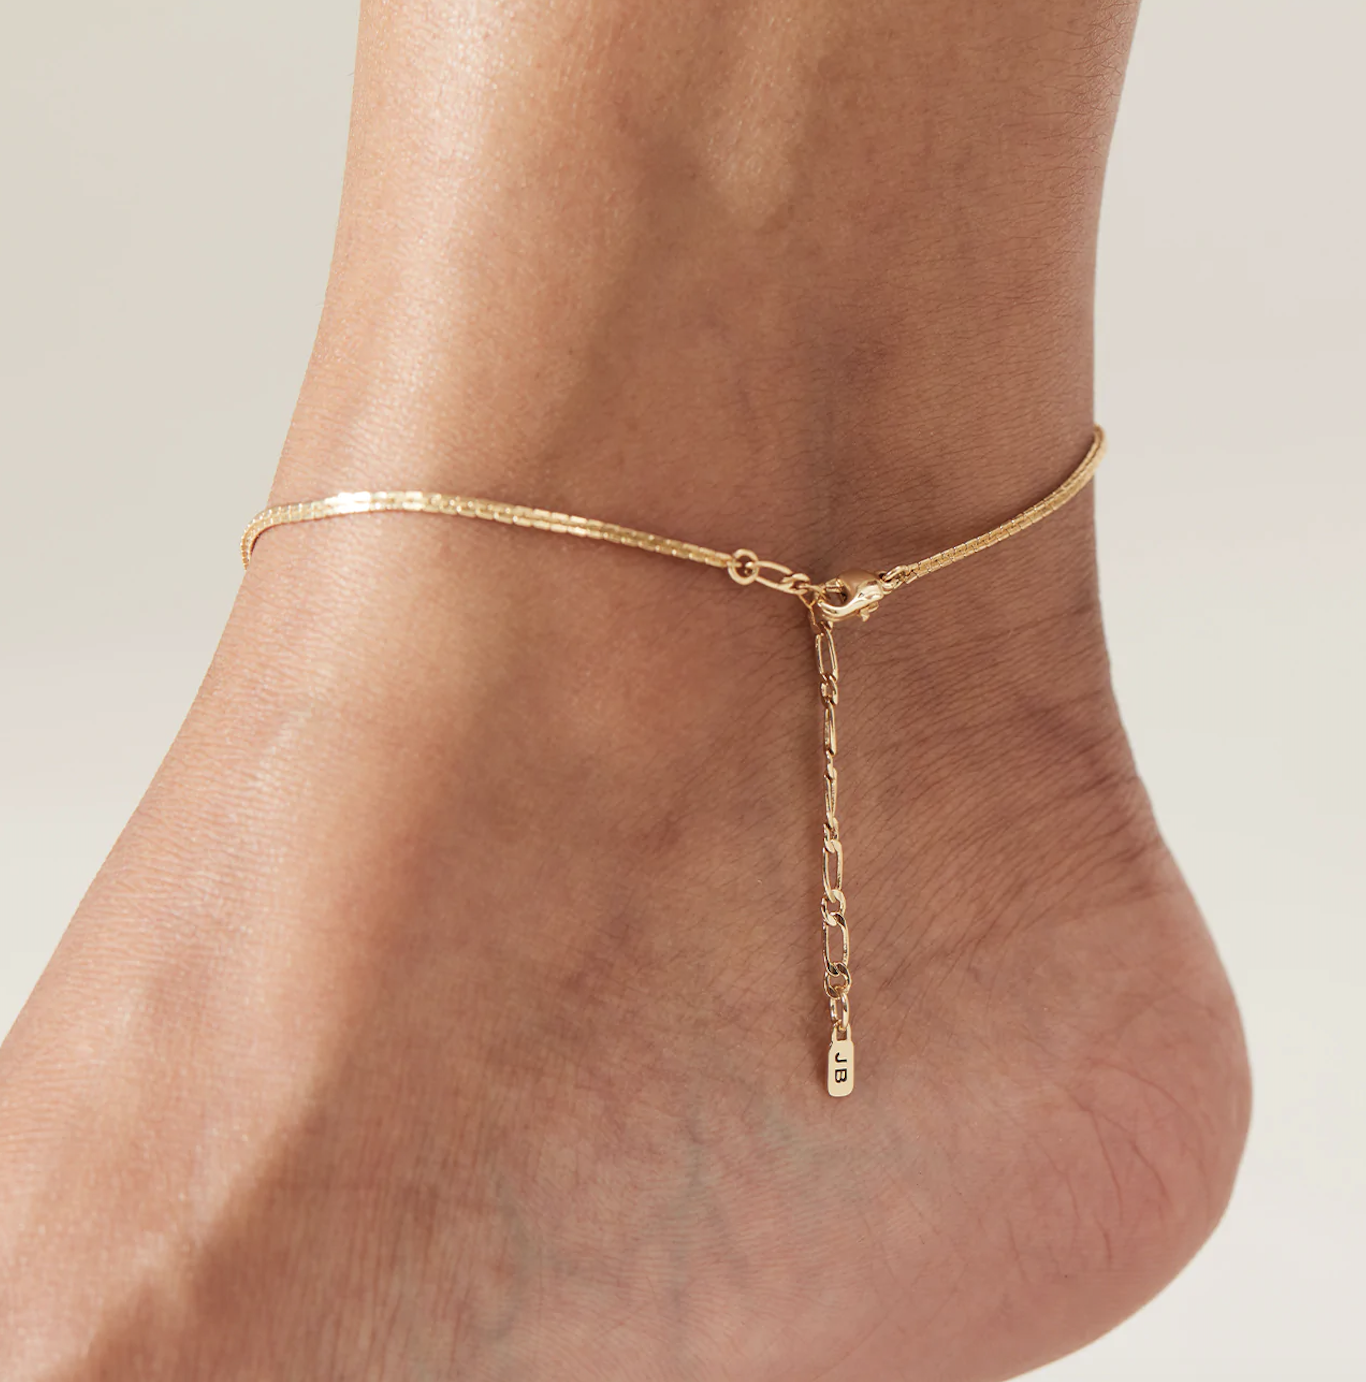 person with the anklet around their foot